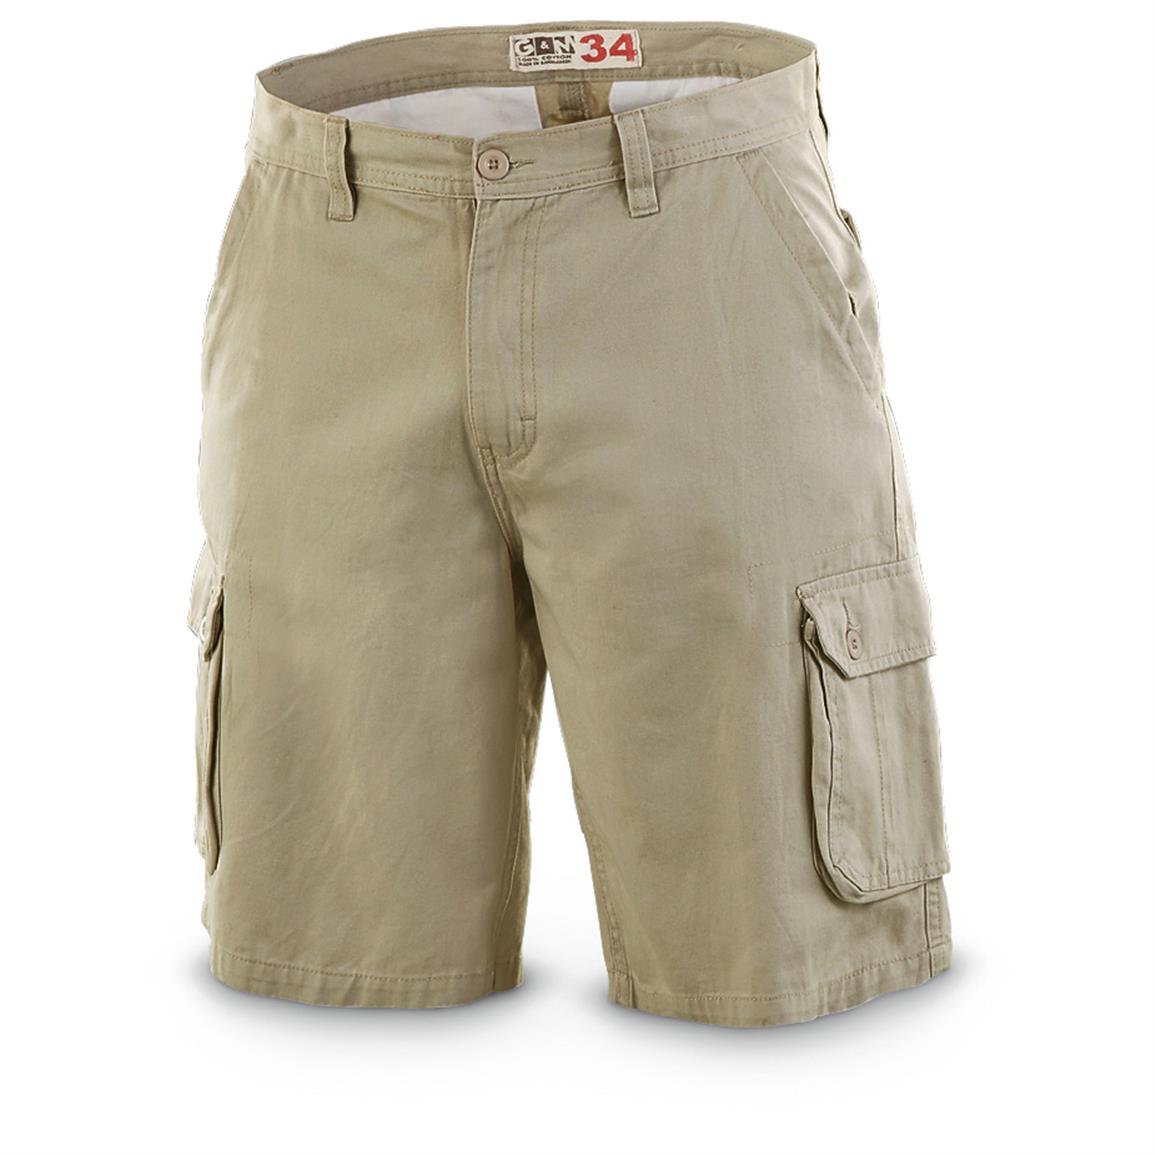 George & Martha Palm Bay Cargo Shorts - 627223, Shorts at Sportsman's Guide